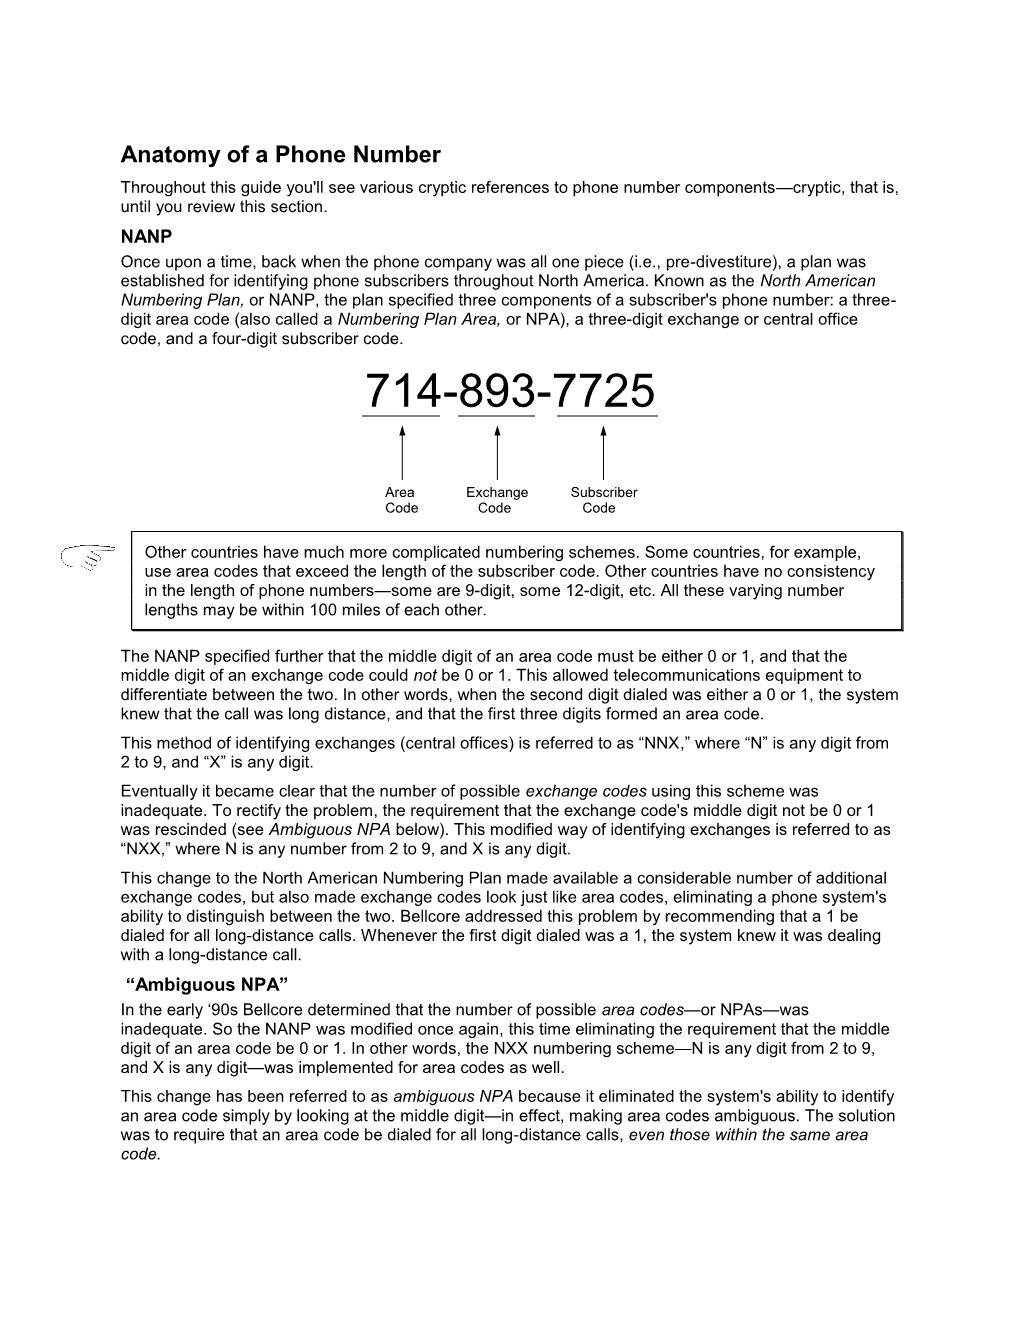 Anatomy of a Phone Number Throughout This Guide You'll See Various Cryptic References to Phone Number Components—Cryptic, That Is, Until You Review This Section